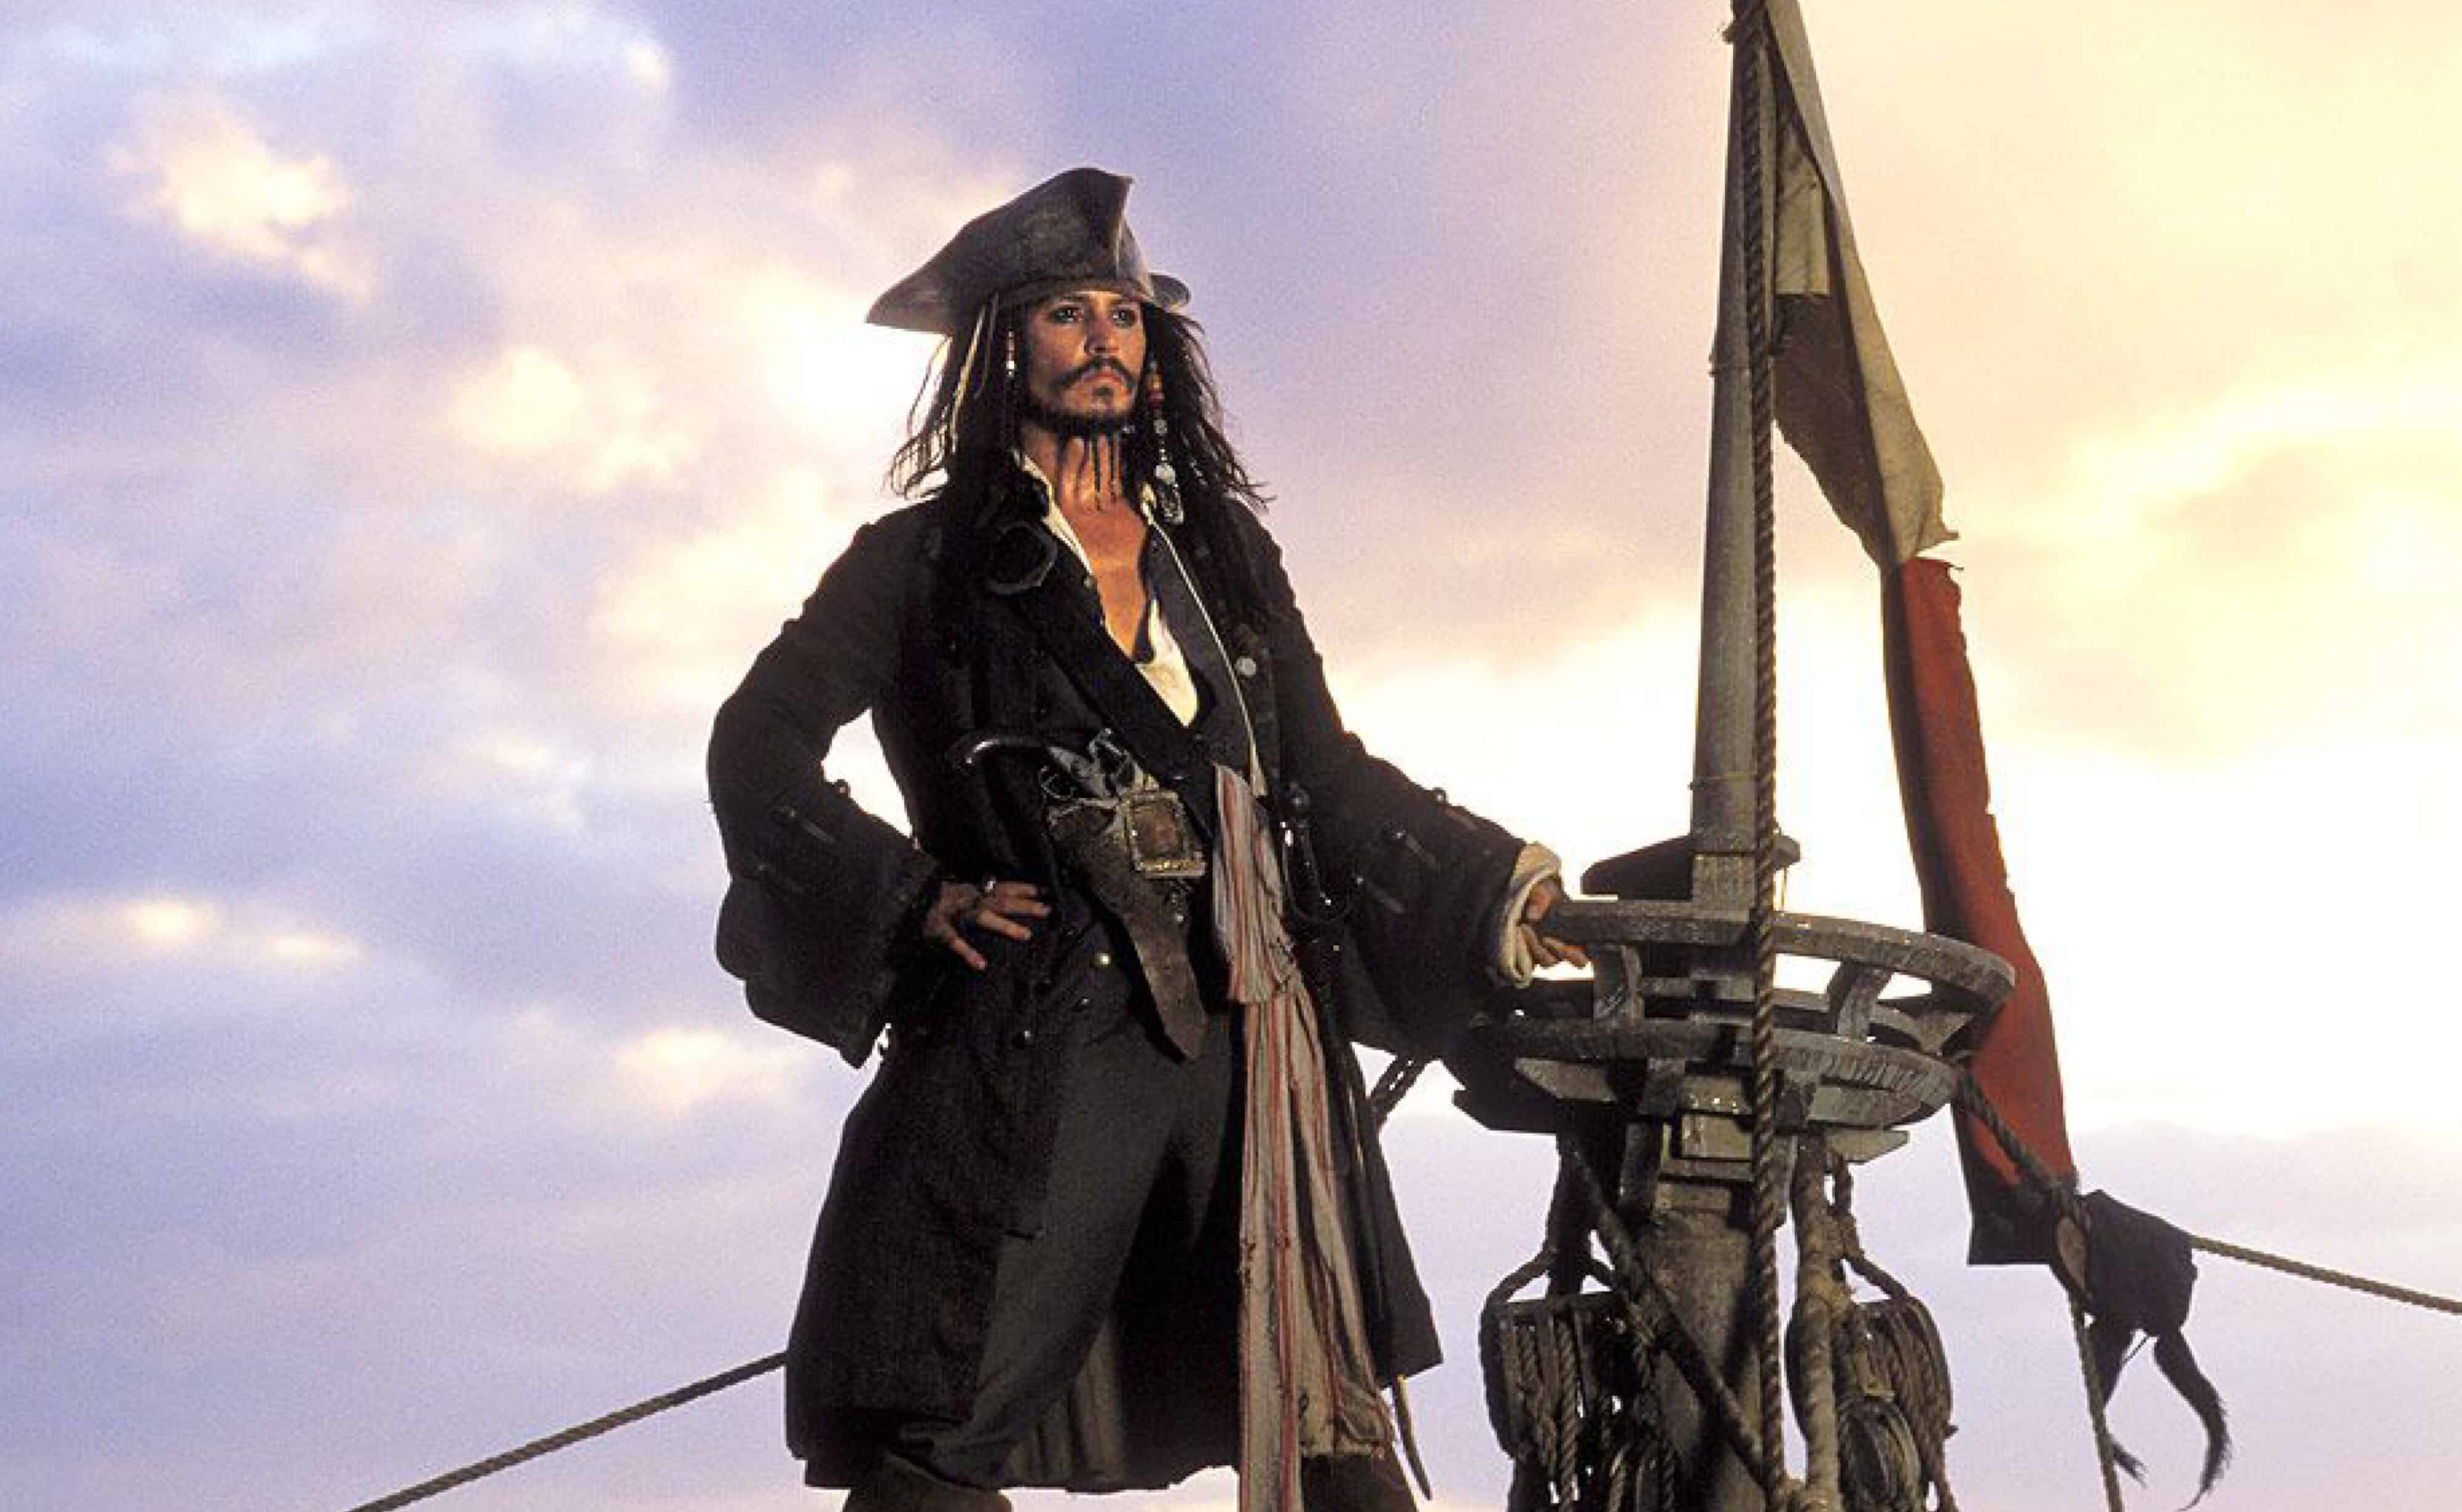 Pirates of the Caribbean: The Curse of the Black Pearl in Concert